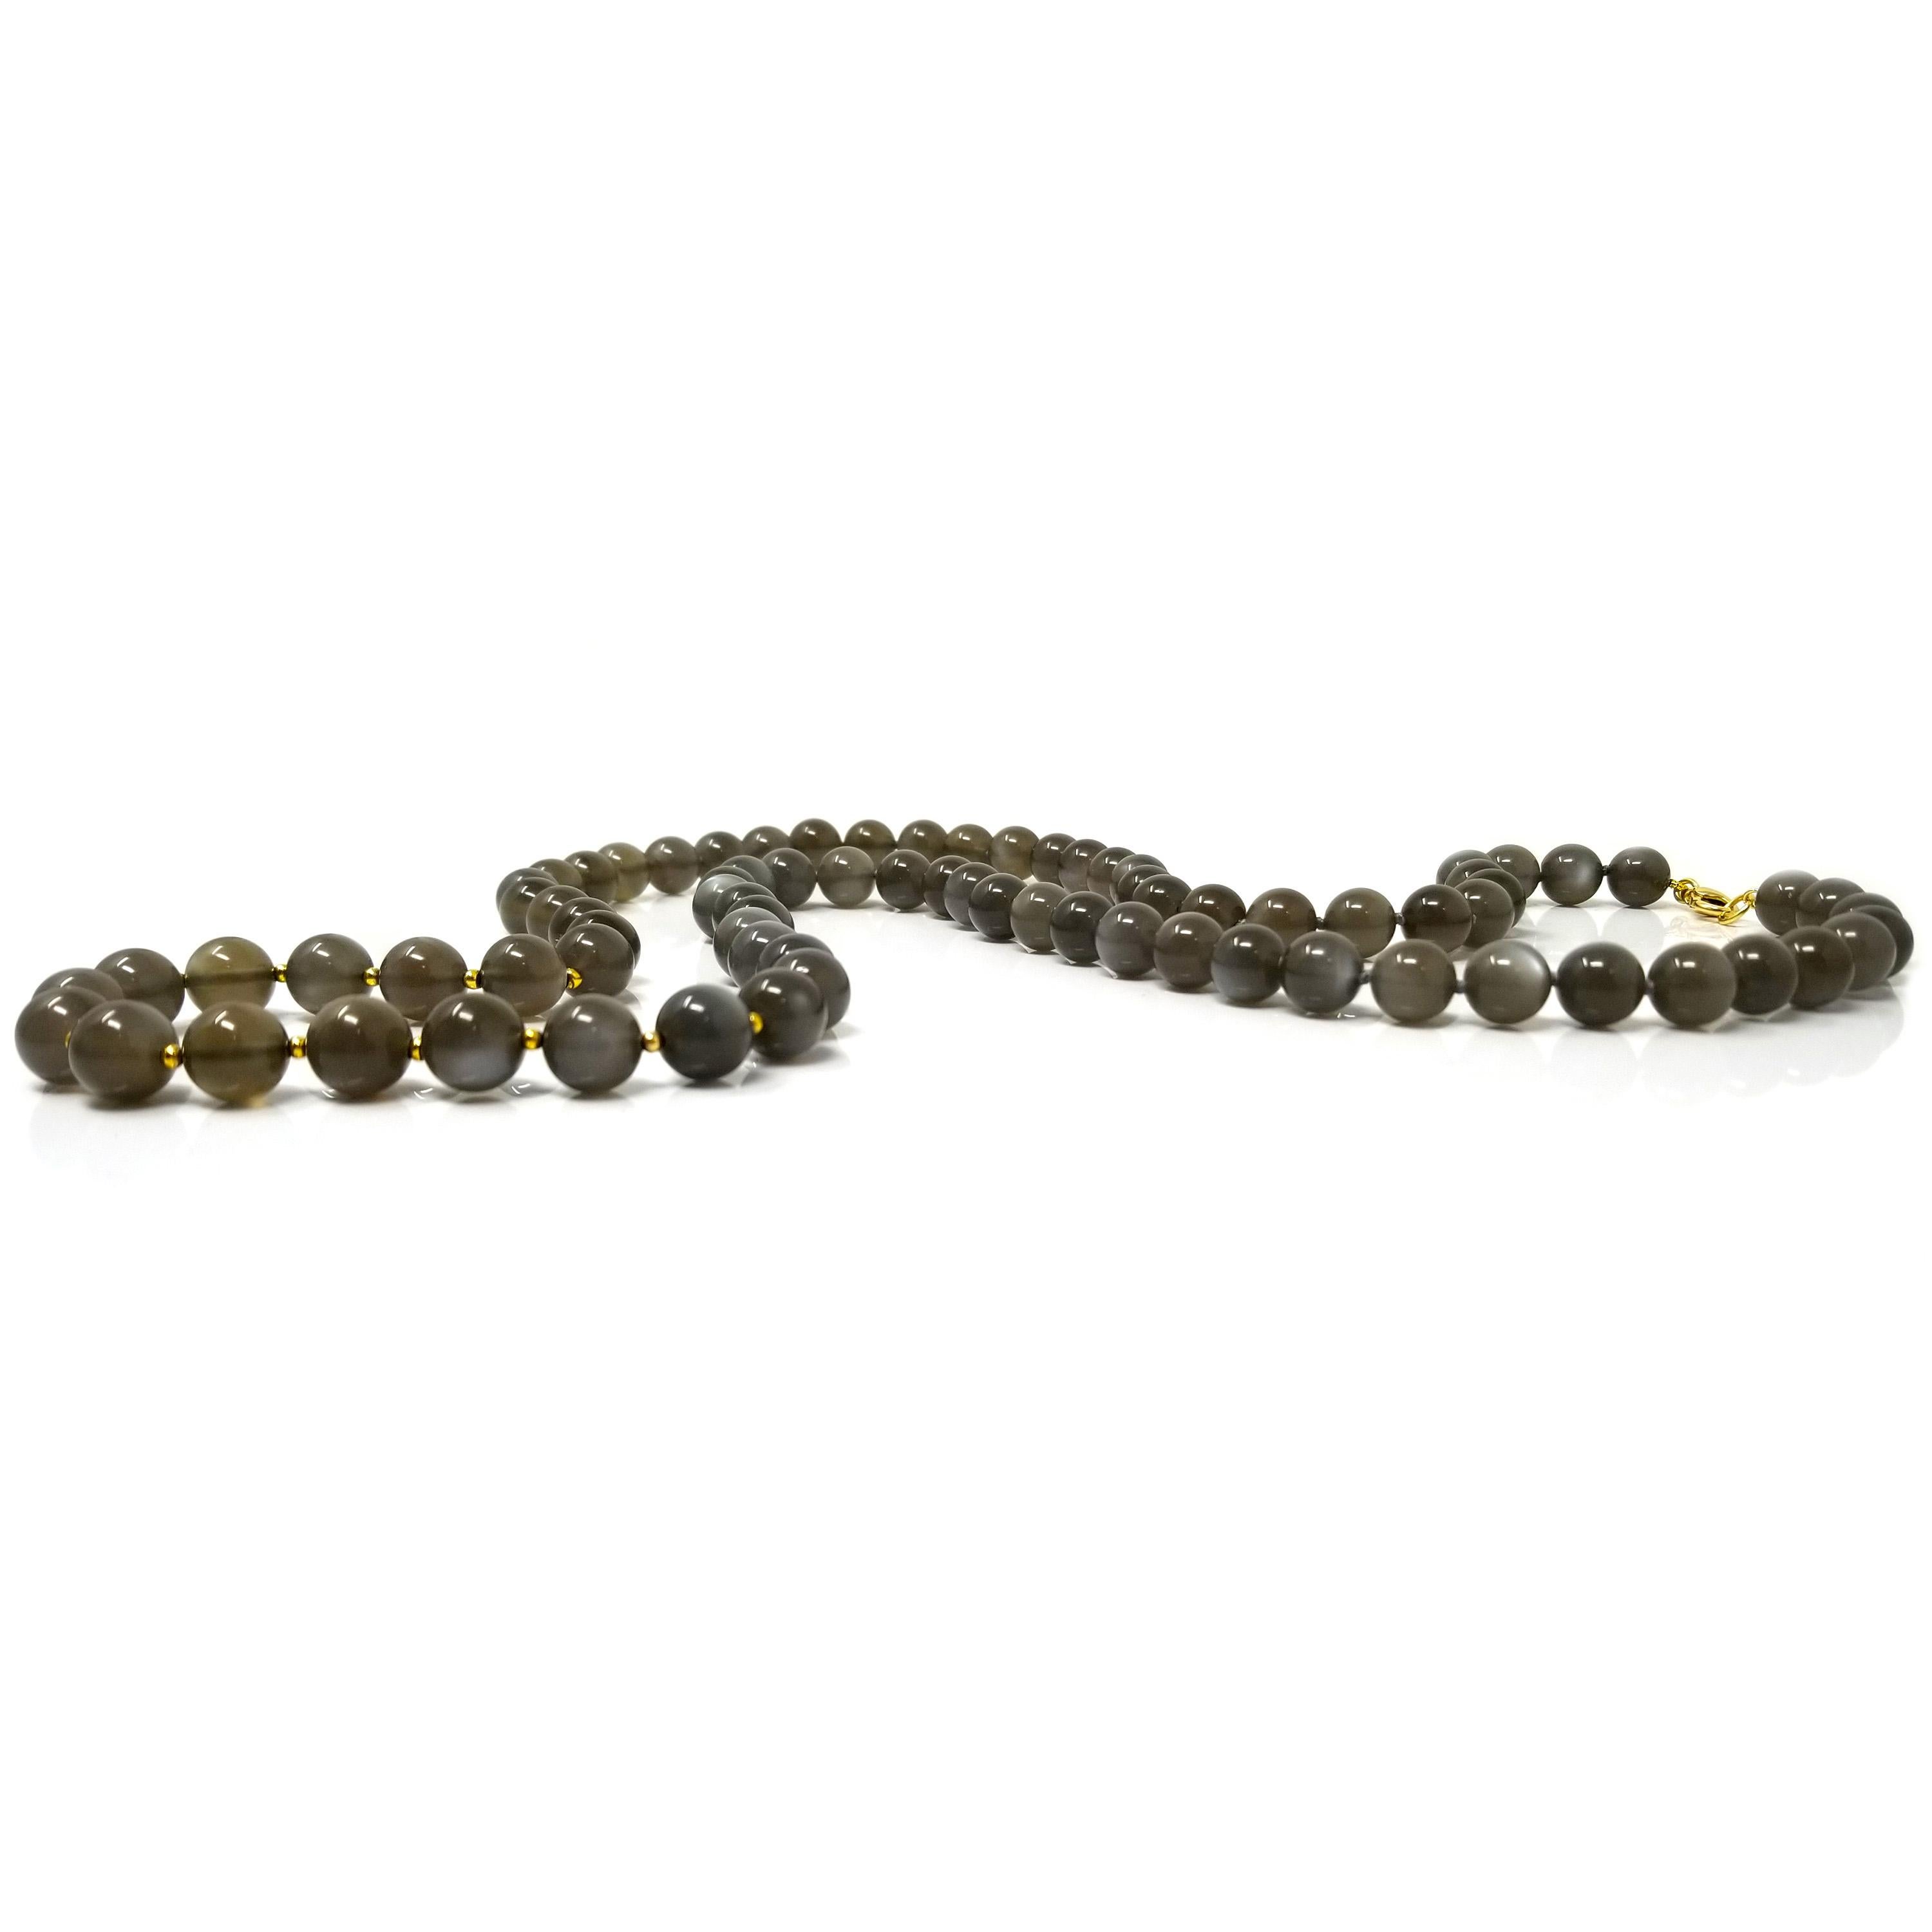 Beaded necklaces made from beautiful gems are such an easy way to elevate an outfit. These ethereal moonstones feature a rich taupe gray color and enchanting adularescence. 

A few delicate 18kt accents add some subtle dimension, and the 18kt